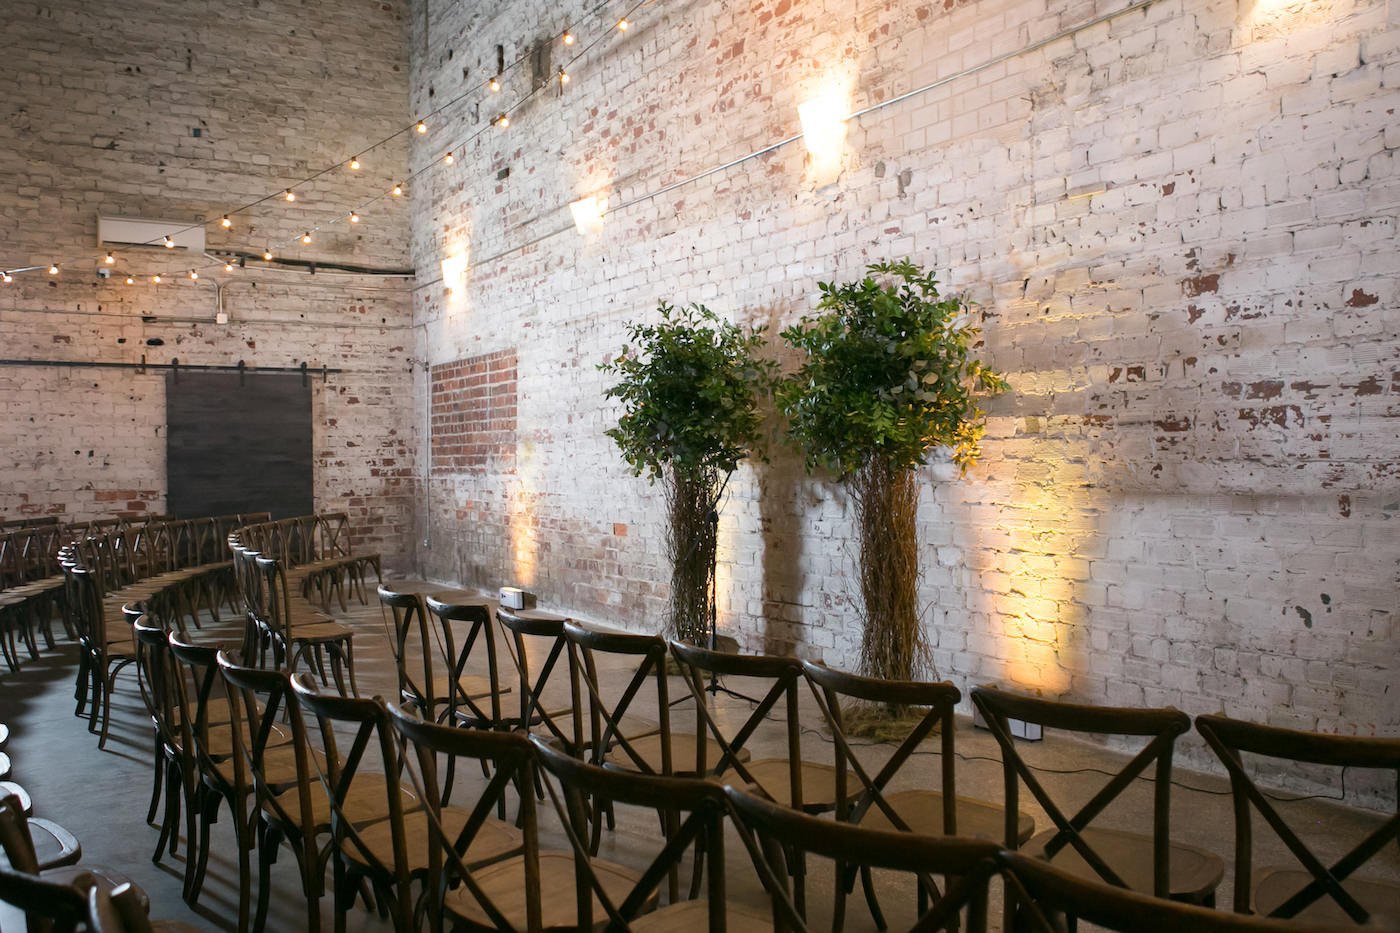 Wes Anderson Themed Wedding Ceremony Decor, Wooden Cross back Chairs, Curly Willow Trees and White Brick Wall with Hanging Lights | Wedding Photographer Carrie Wildes Photography | Tampa Bay Wedding Planner UNIQUE Weddings + Events | Wedding Florist Monarch Events and Design | Wedding Venue Rialto Theatre